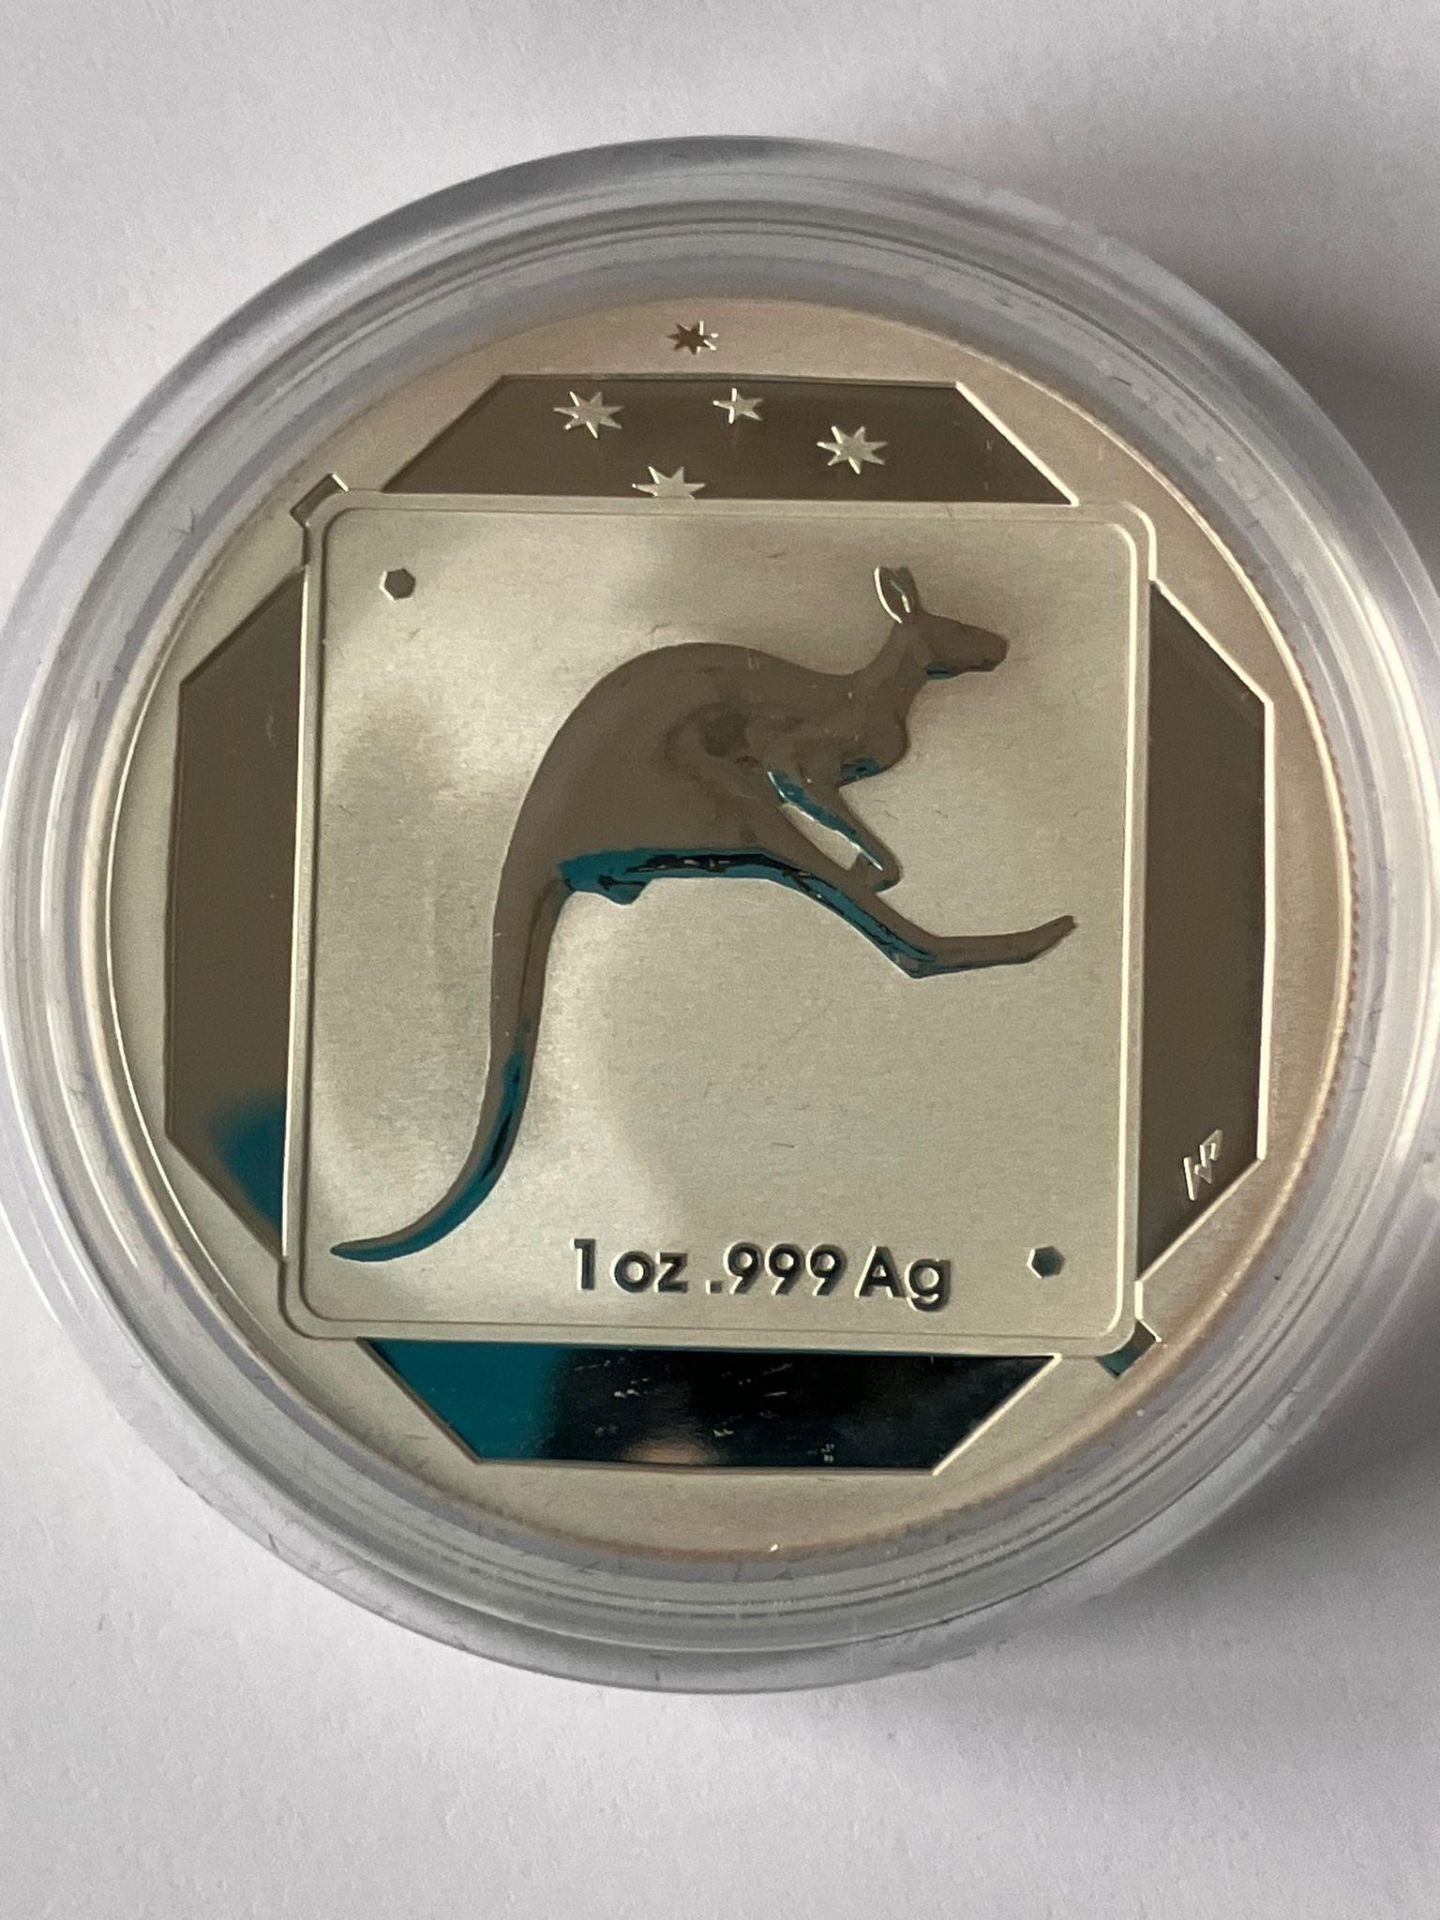 2013 SILVER AUSTRALIAN KANGAROO COIN. A limited edition PURE SILVER DOLLAR COIN struck by the - Image 8 of 9